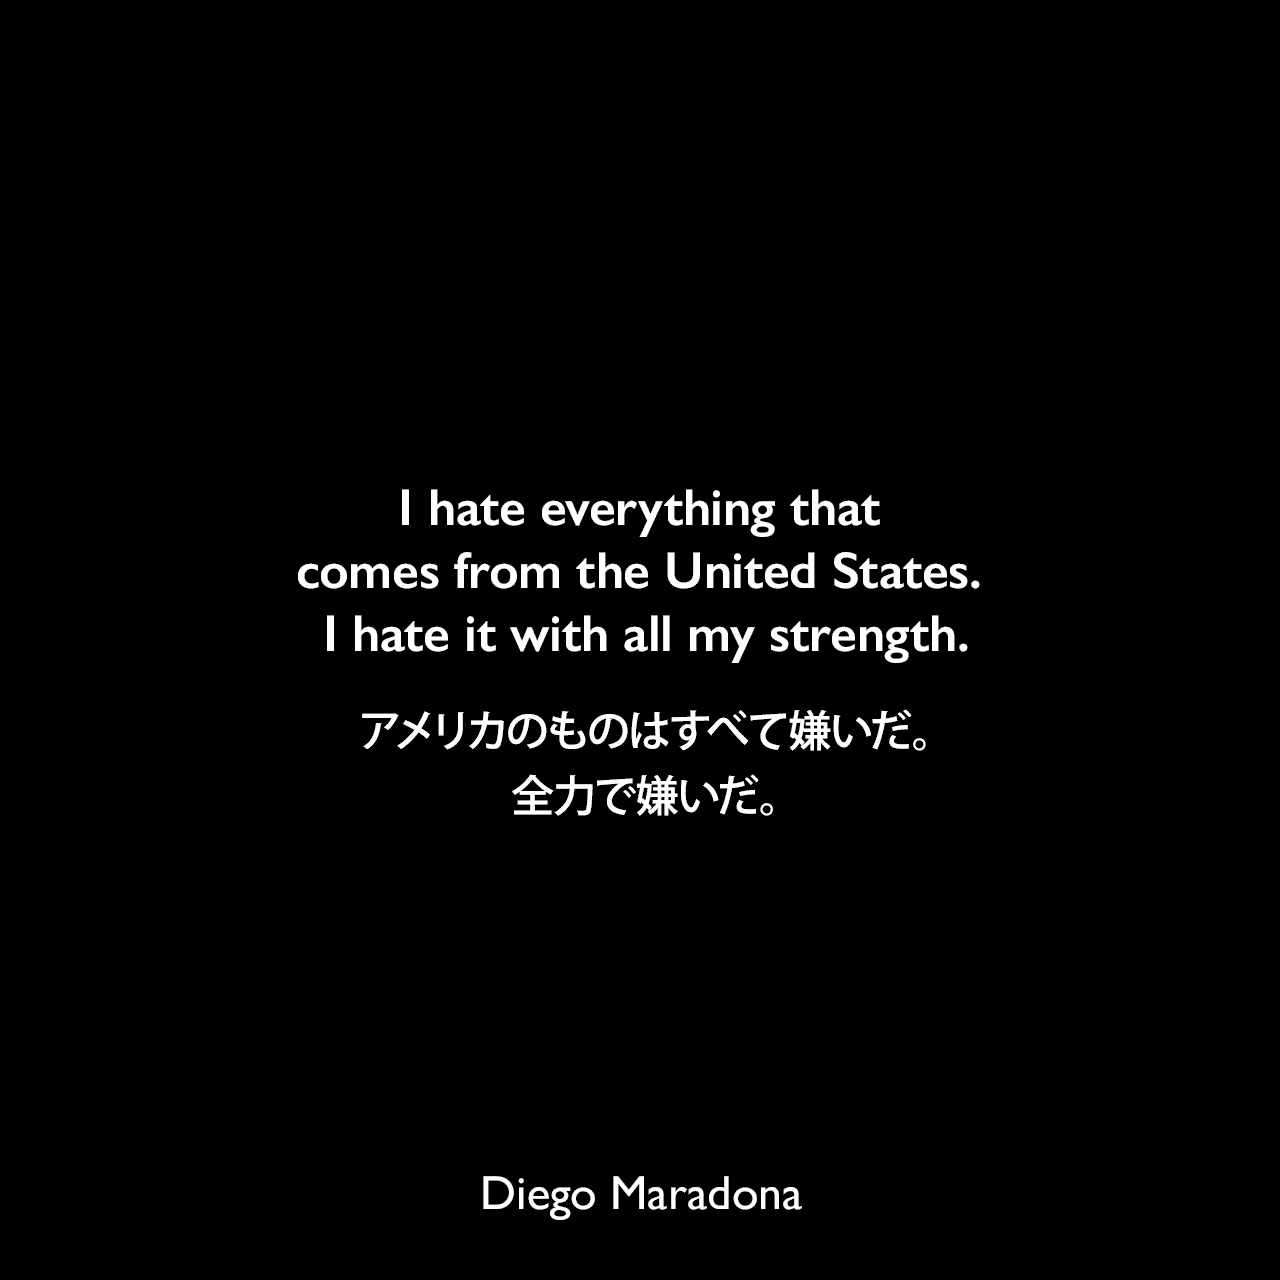 I hate everything that comes from the United States. I hate it with all my strength.アメリカのものはすべて嫌いだ。全力で嫌いだ。Diego Maradona